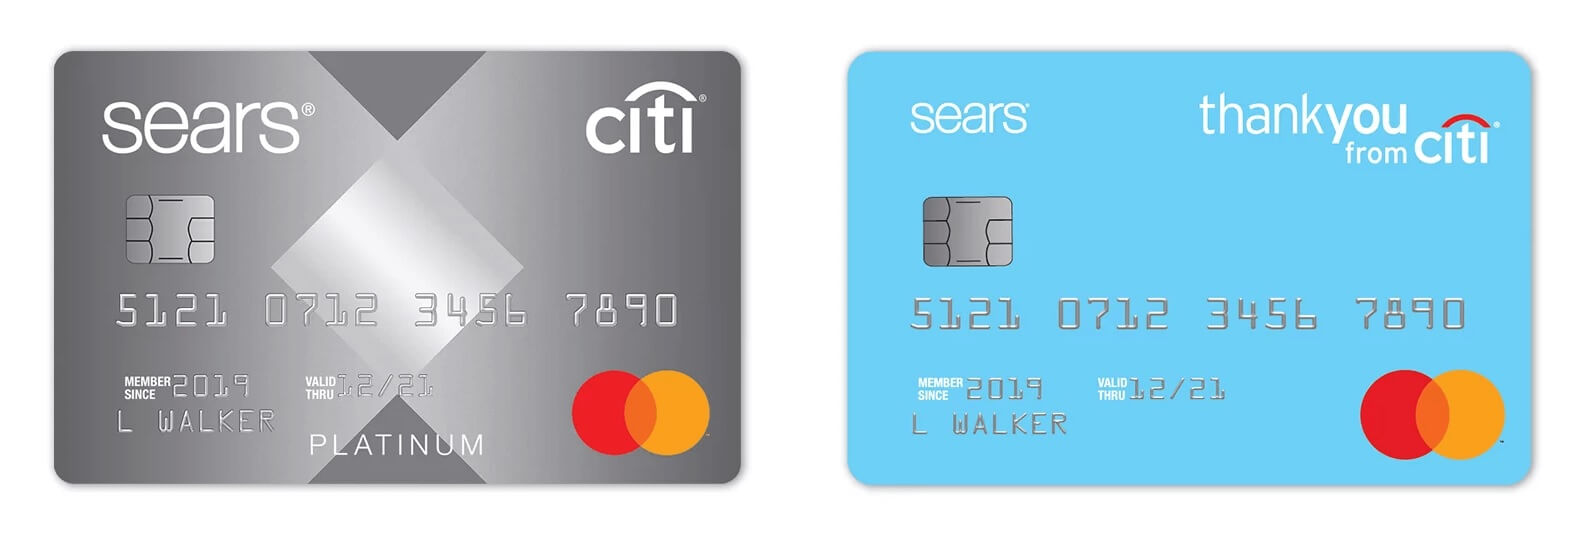 sears credit card page